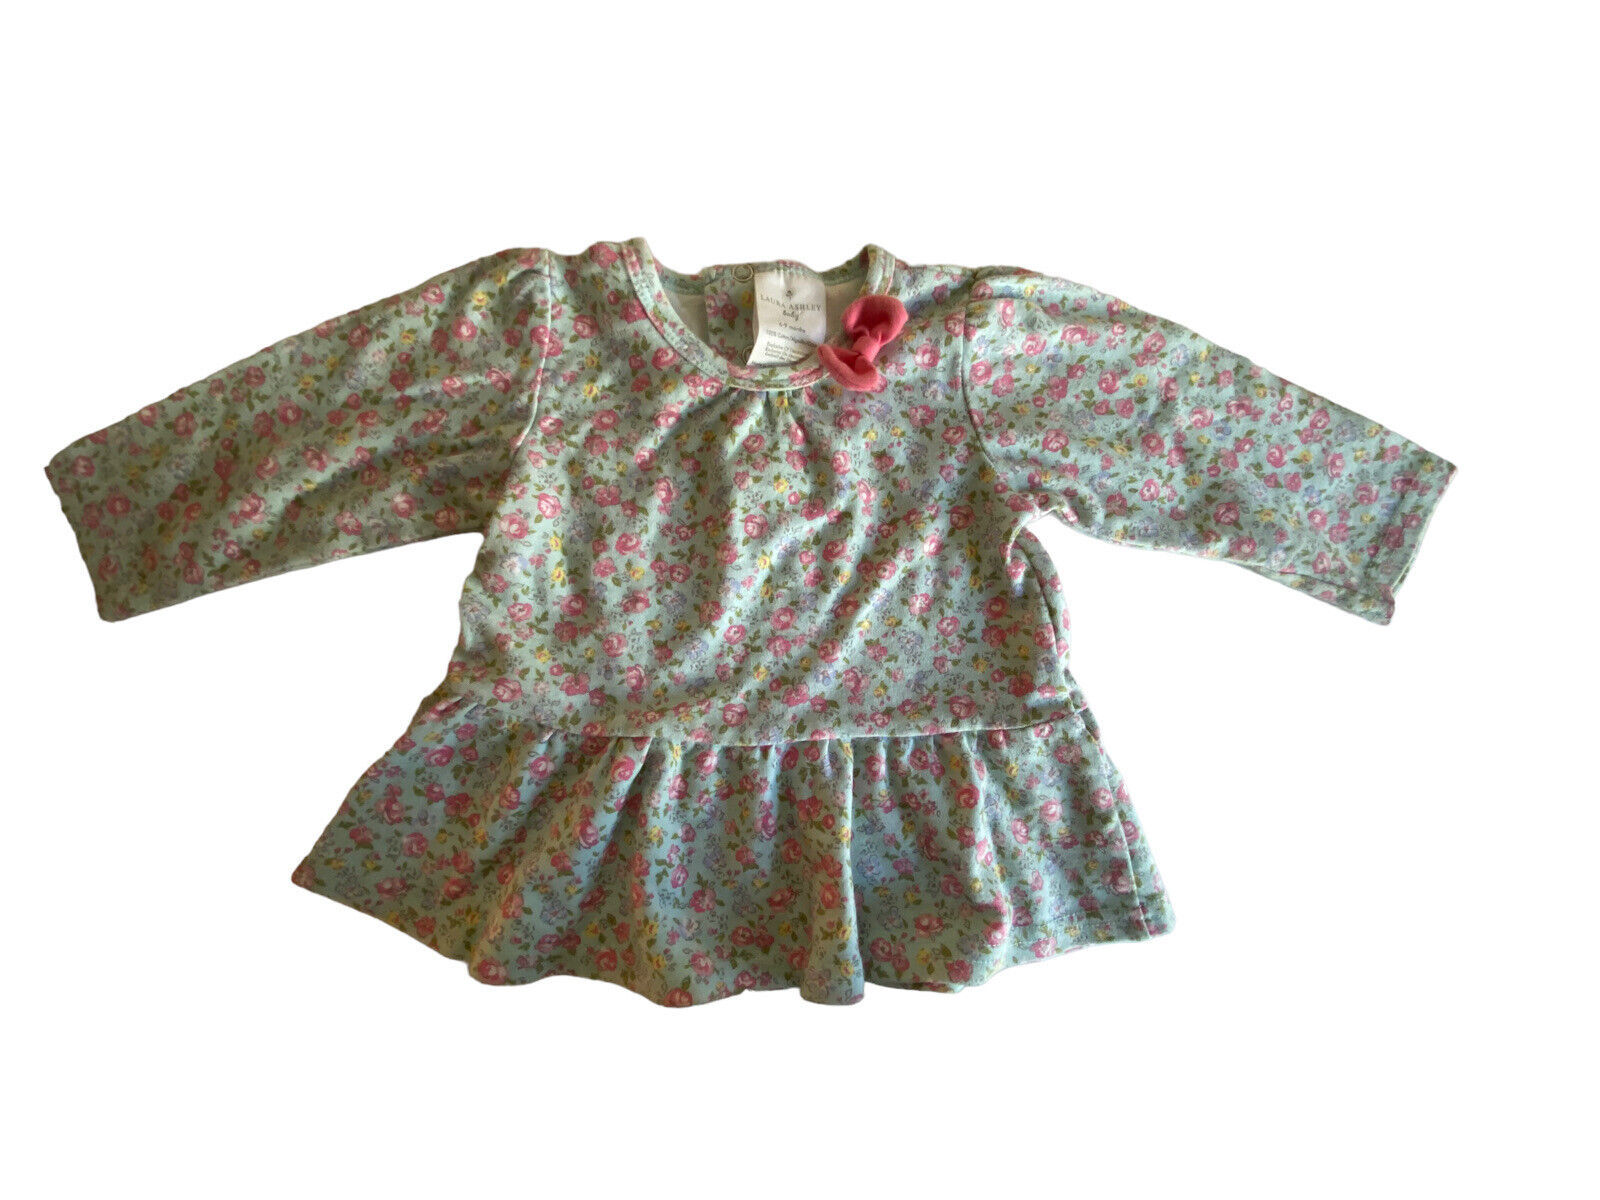 Baby Girl Laura Ashley Baby Dress Size 6-9 Months cottagecore Flowers - $9.89